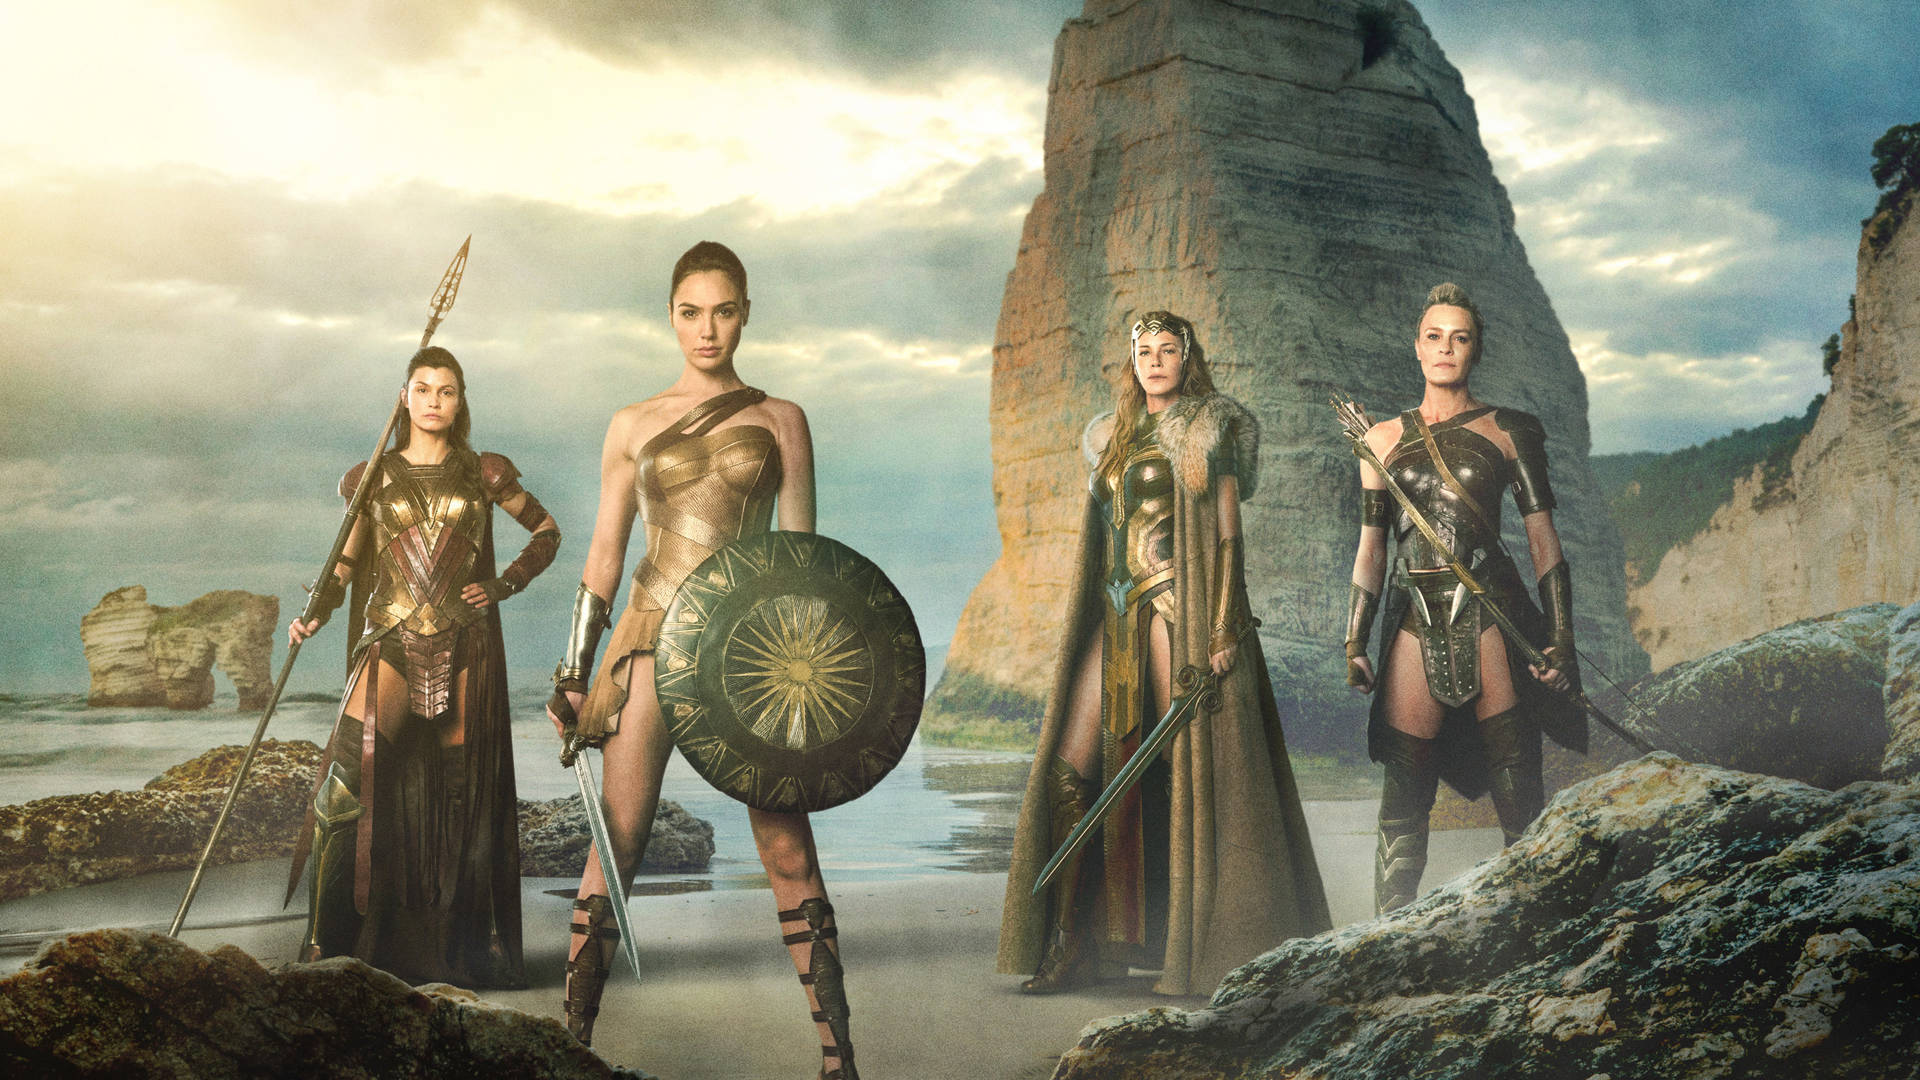 Wonder Woman unites Amazon warriors in epic fight for justice. Wallpaper